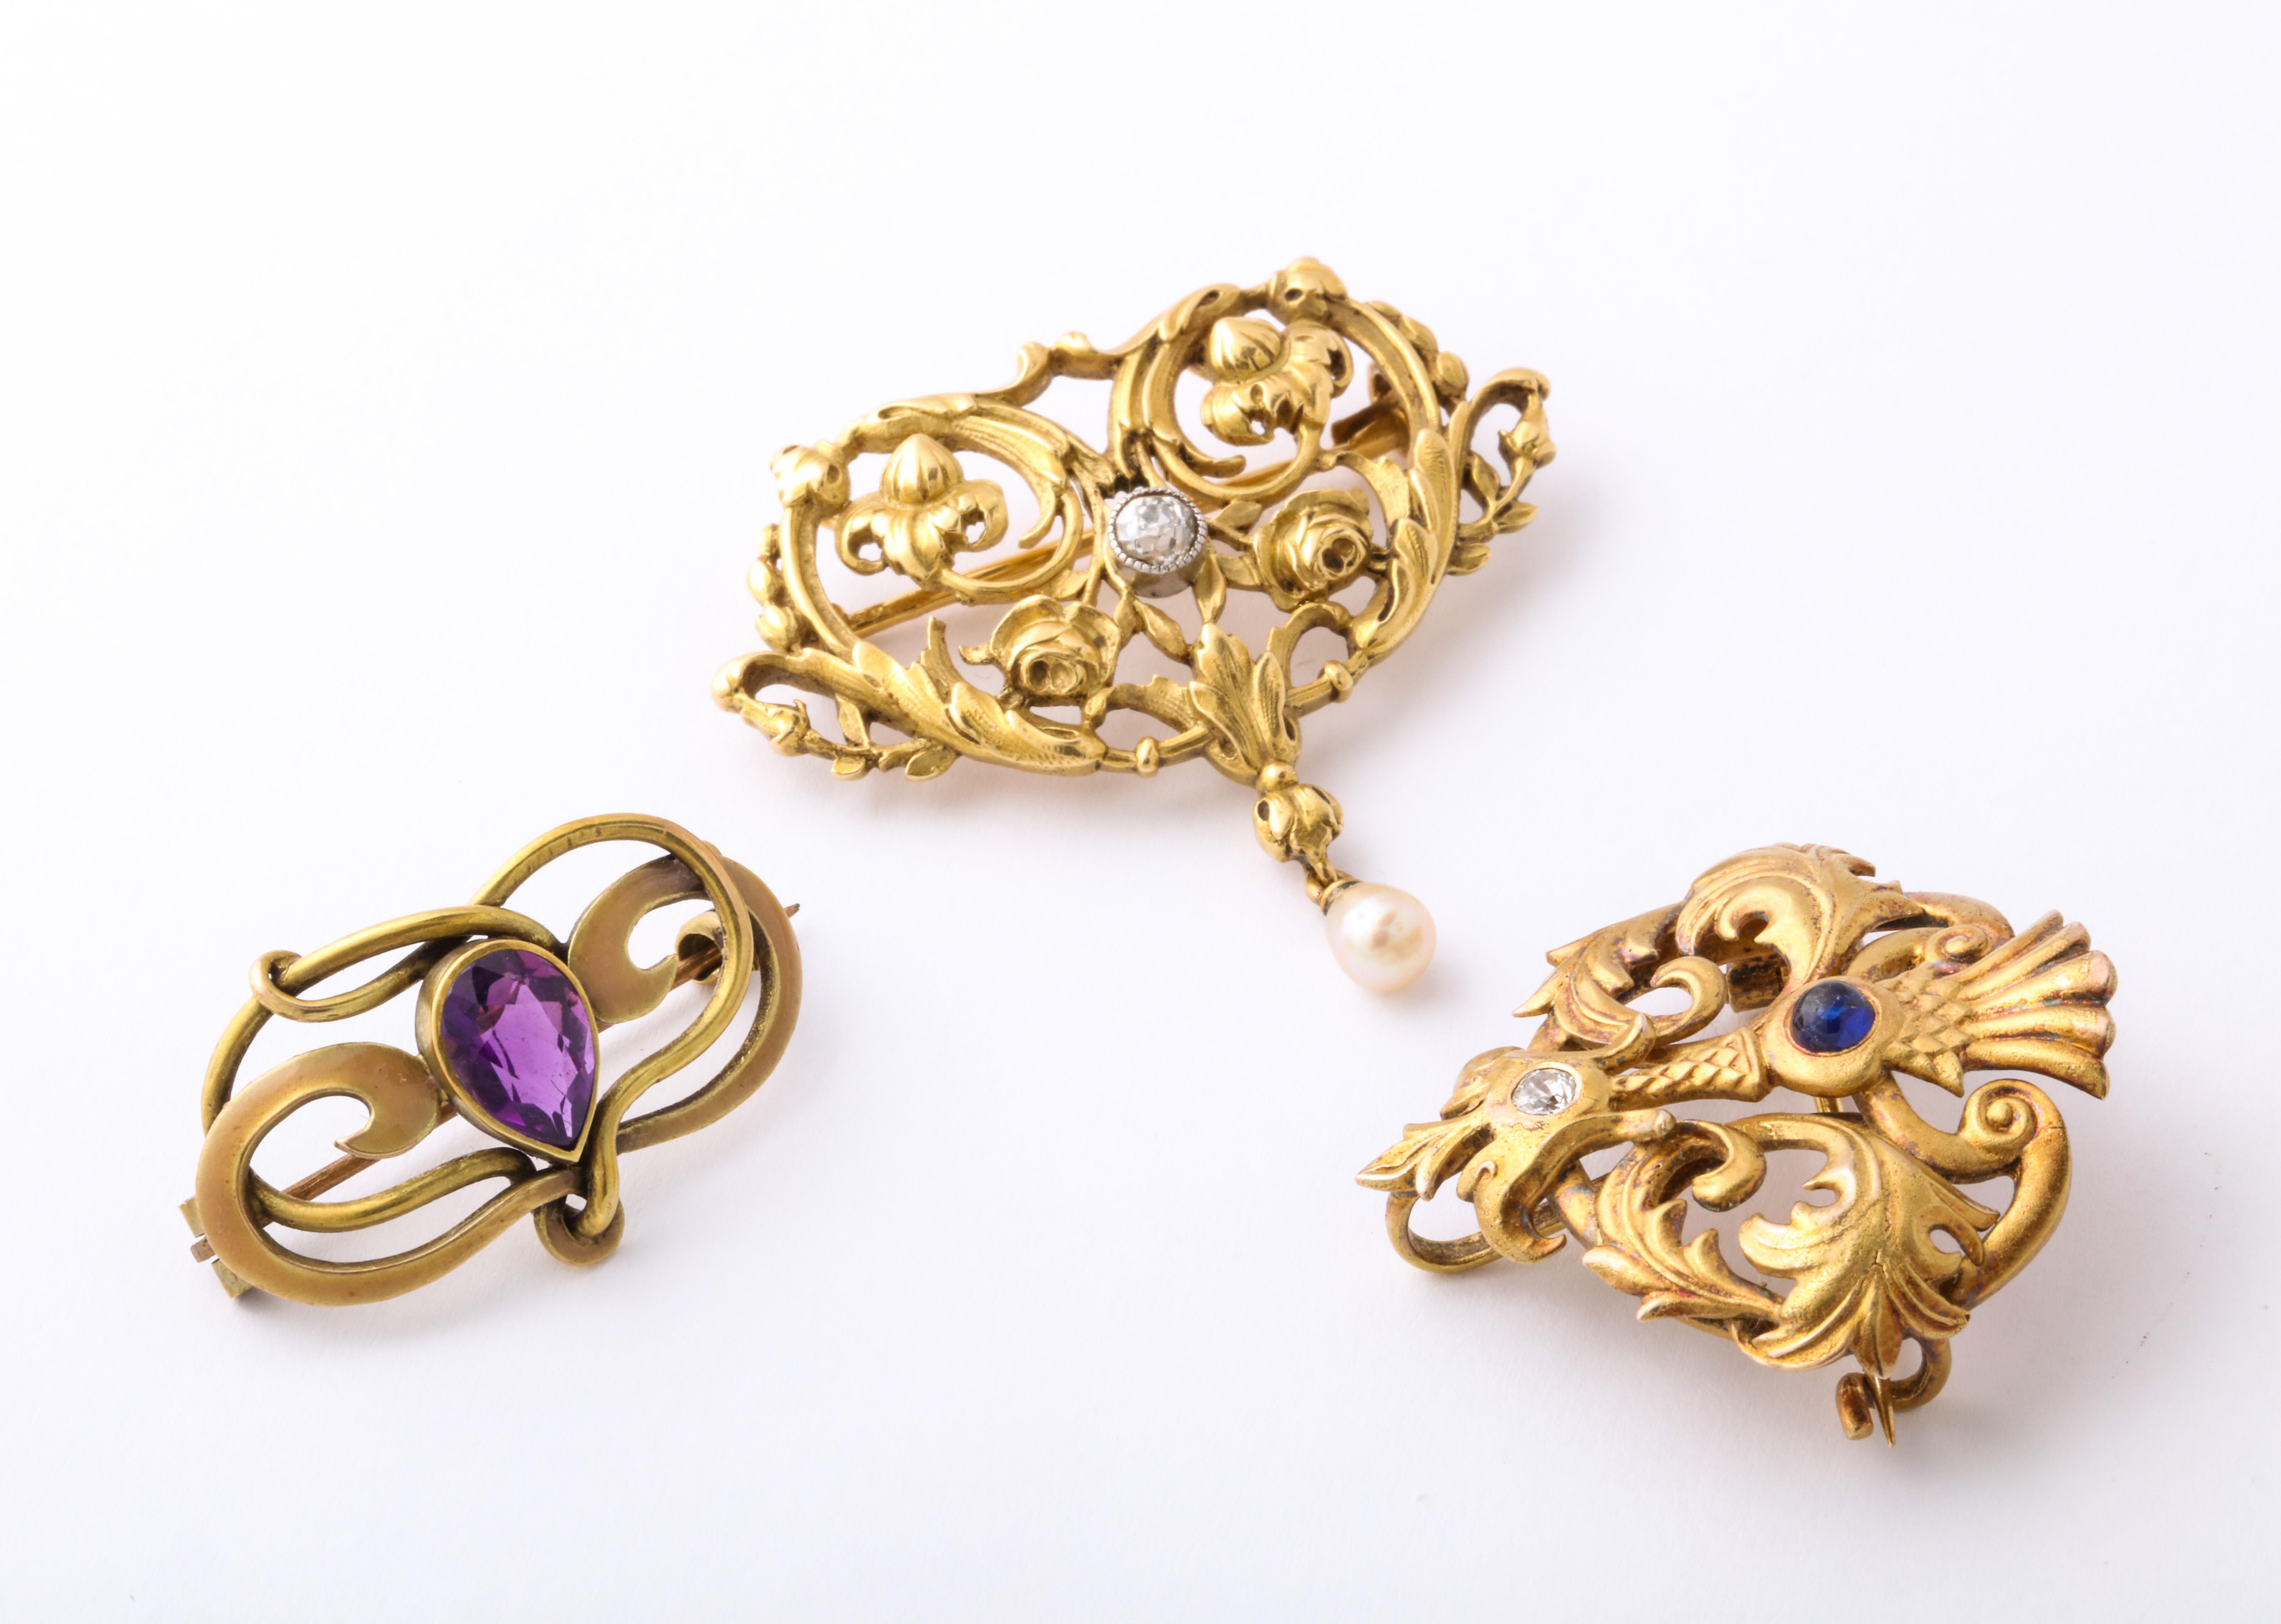 Three various brooches, all with the finest gold work from the early 1900's, are from the far right, a Rikers brooch in 14 Kt with a sapphire and diamond. Rikers is a highly reputed jewelry firm from Newark that made jewelry when the American